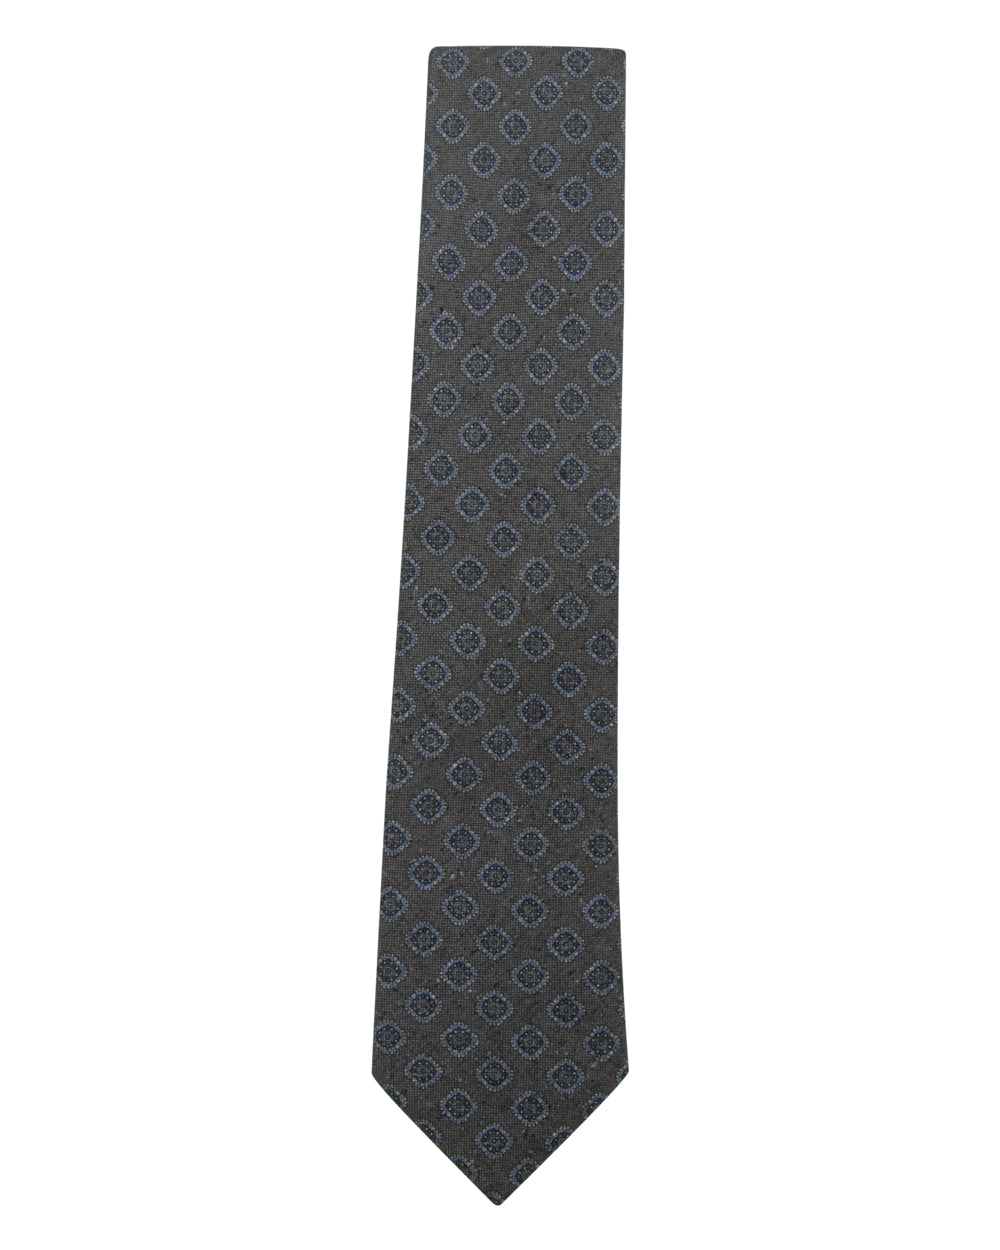 Gray and Blue Medallion Tie